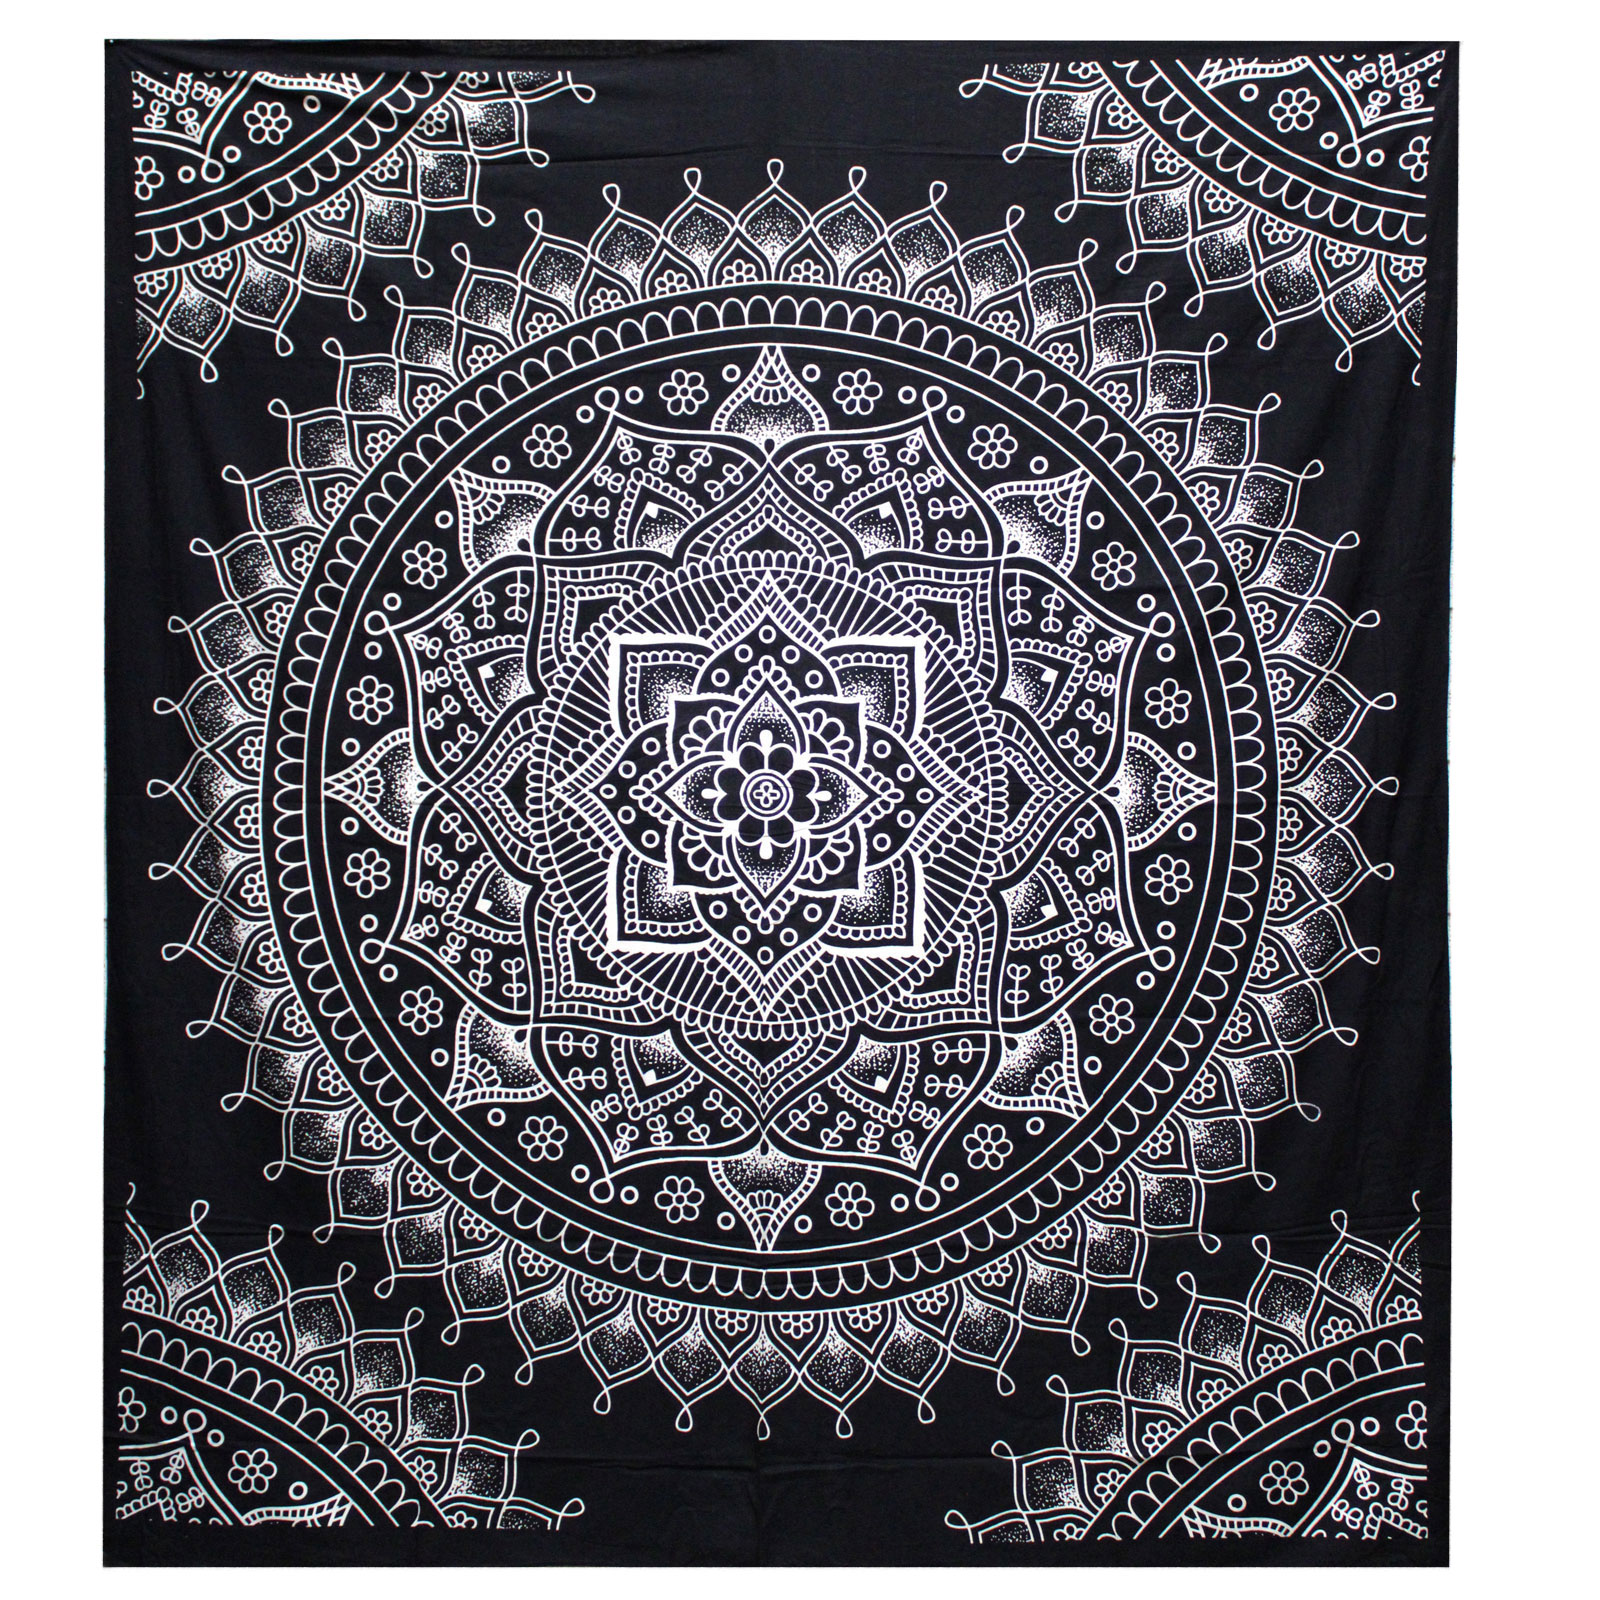 B&W Double Cotton Bedspread Wall Hanging - Lotus Flower